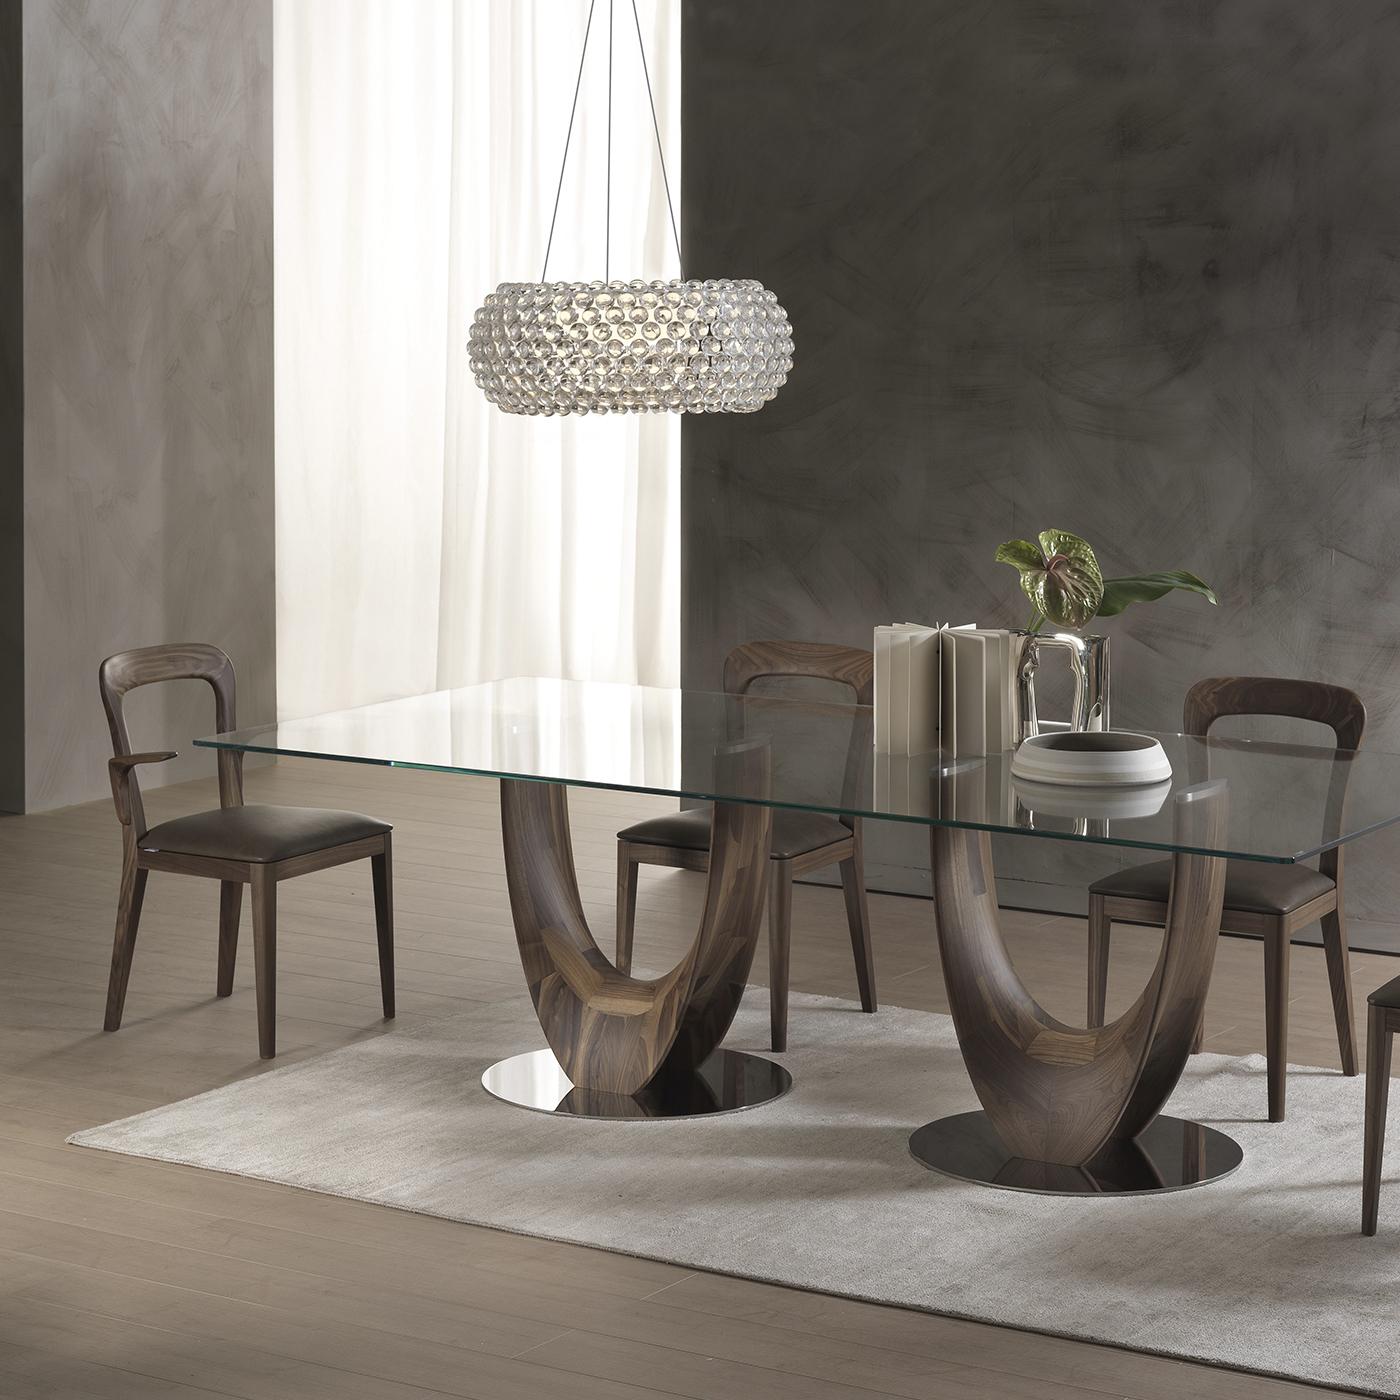 This stunning dining table is part of the Mobius collection designed by Stefano Bigi. The elegant top is a rectangle in tempered glass and electro-welded supports (available with a thickness of either 10 or 12 mm, also in clear). Underneath it, two